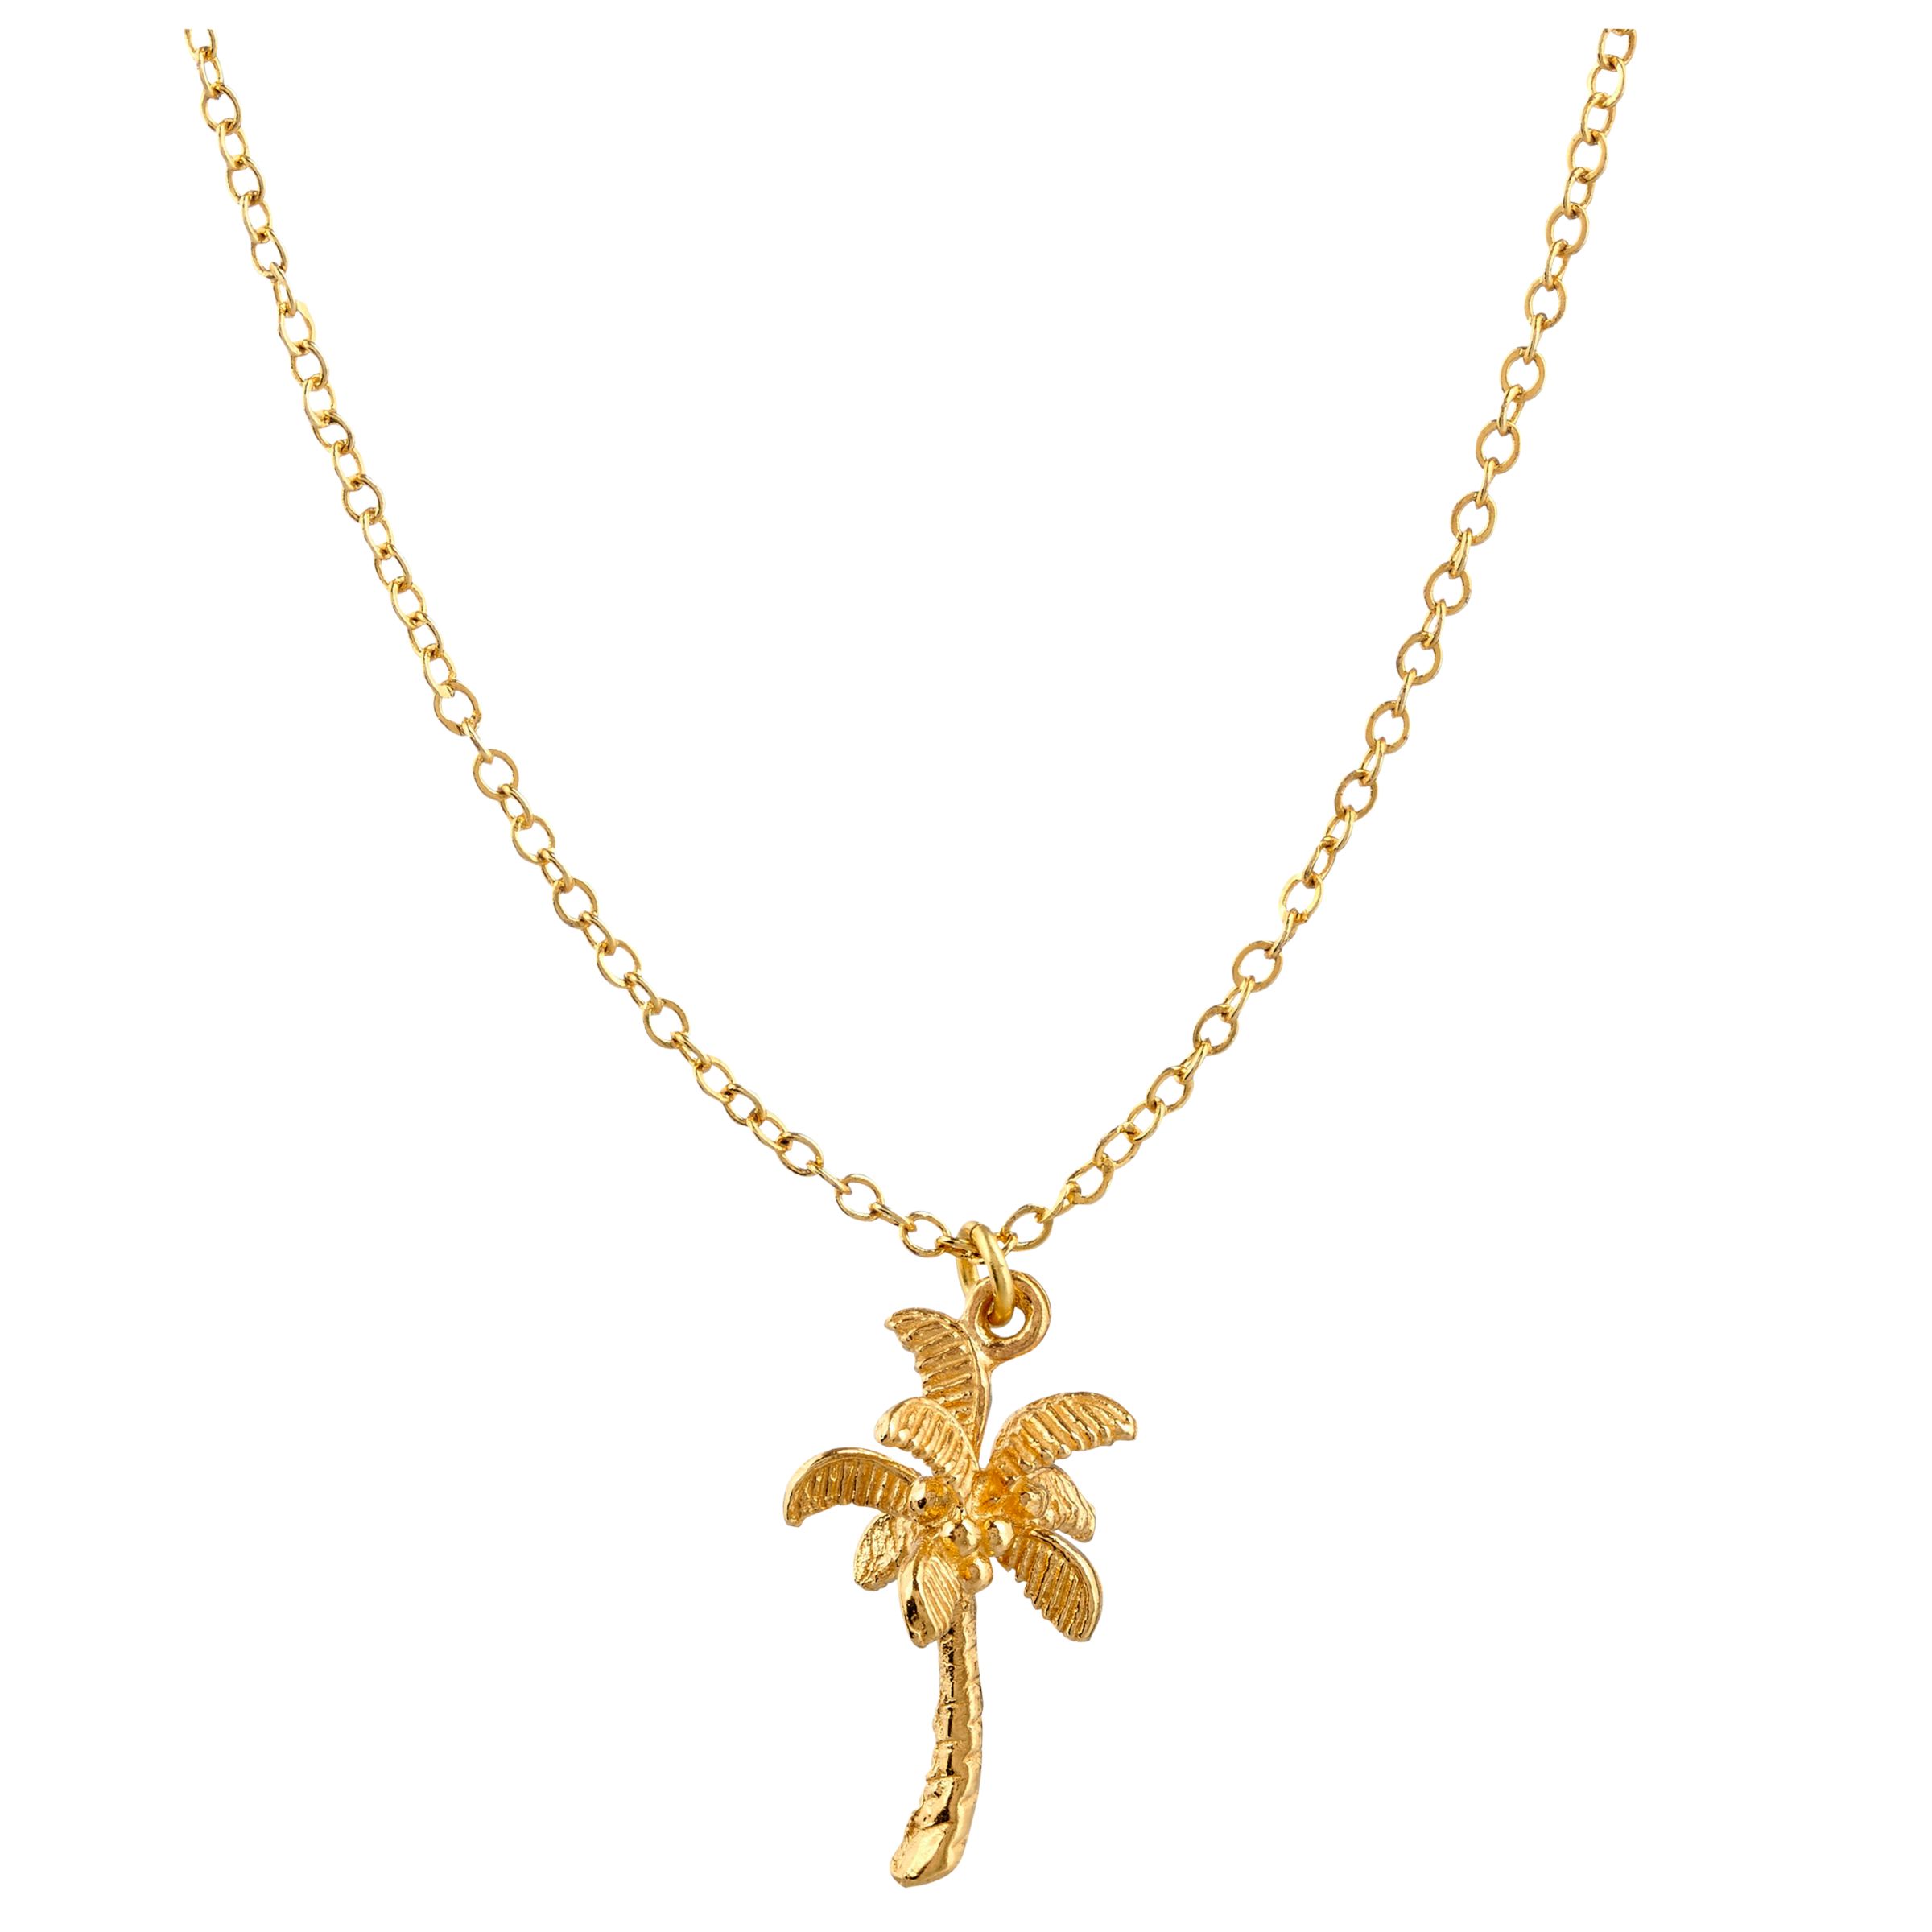 Mirabelle Palm Tree Pendant Chain Necklace, Gold at John Lewis & Partners